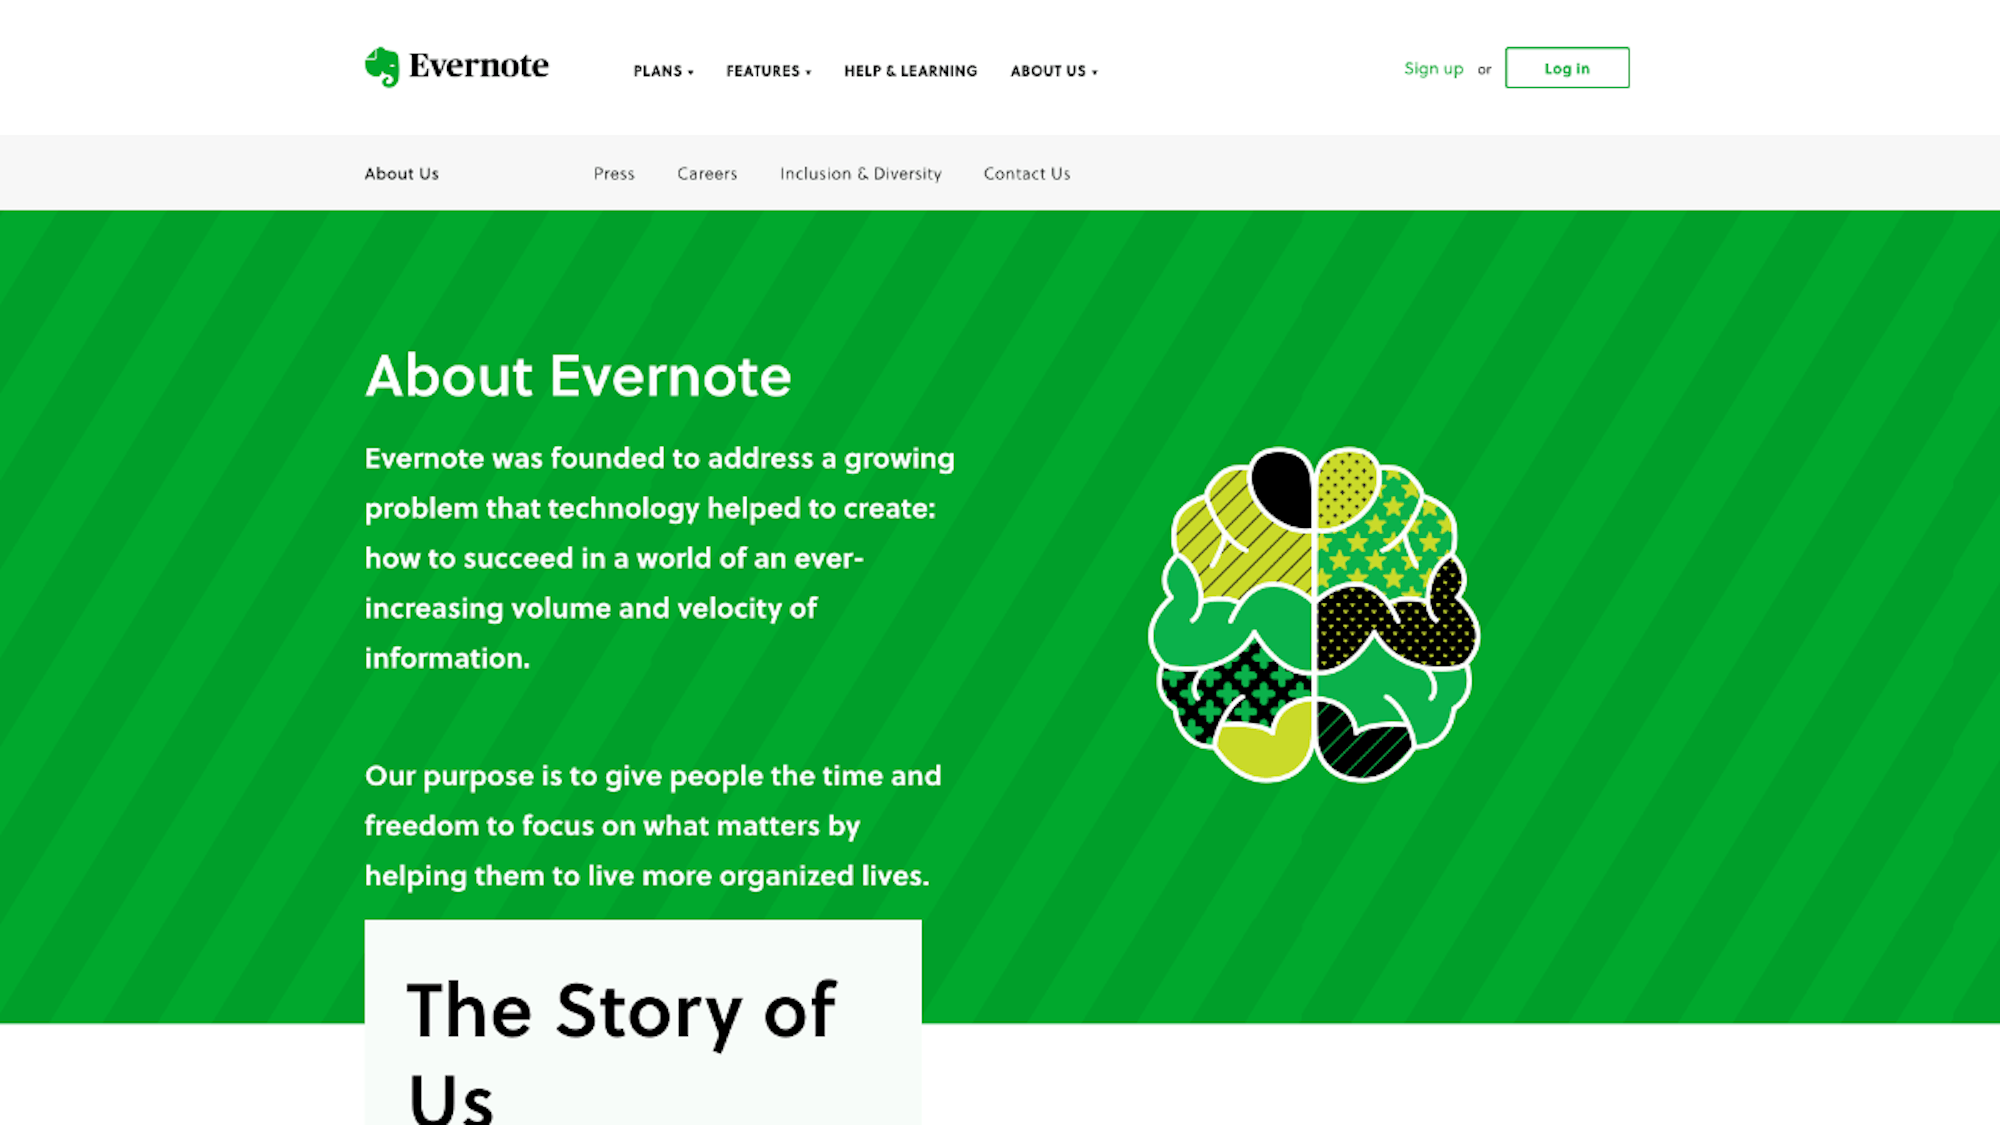 Evernote's About Us Page